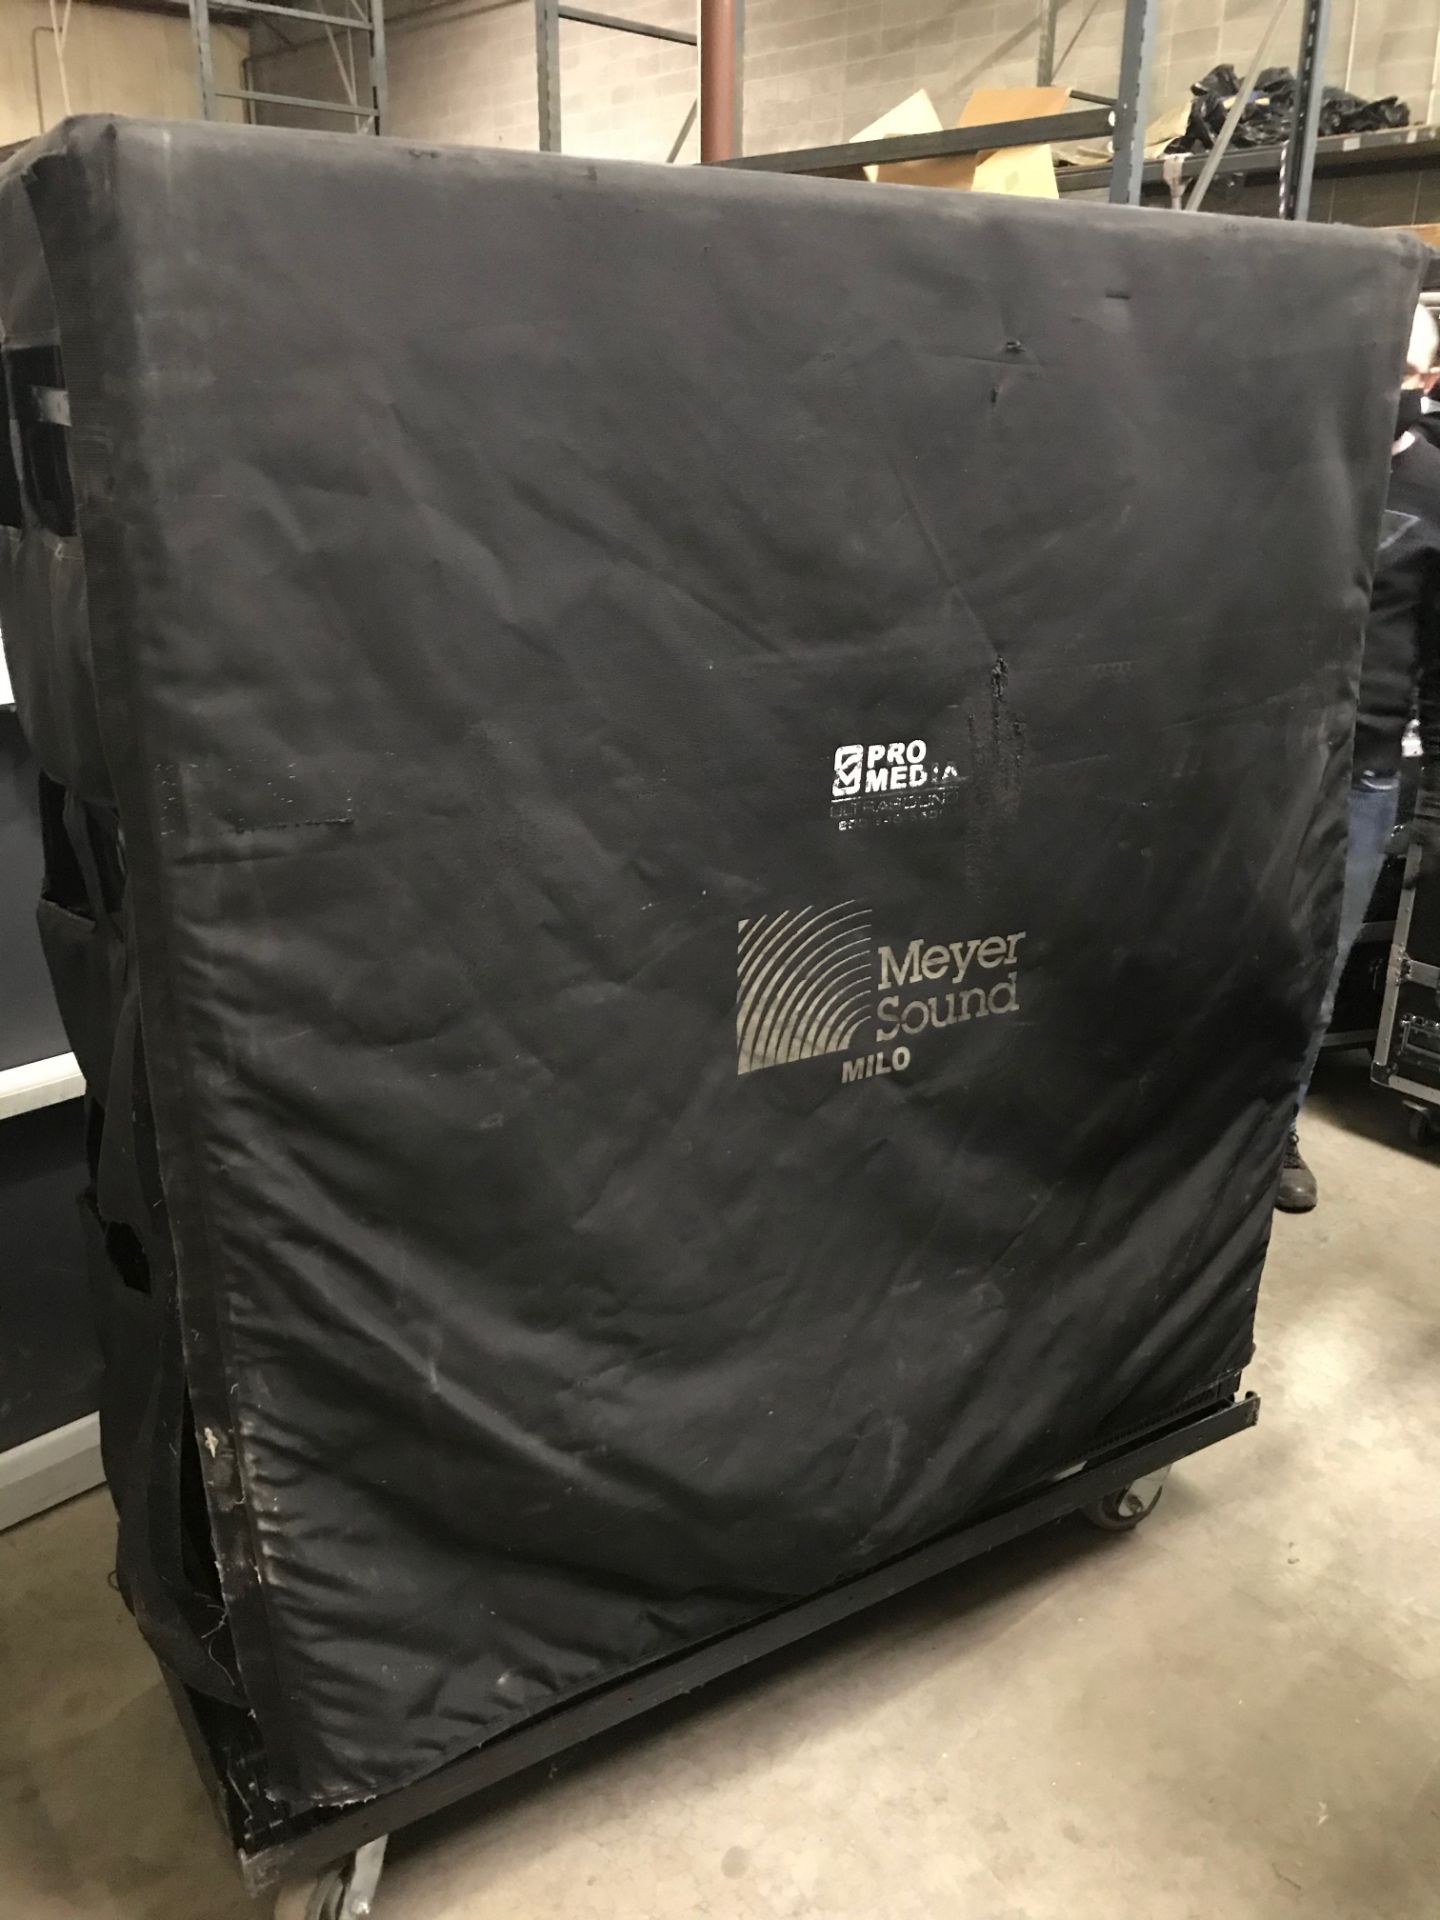 LOT OF: (4) MEYER SOUND, MILO HP MONITORS W/ ROLLING CART AND DUST COVER - Image 7 of 7